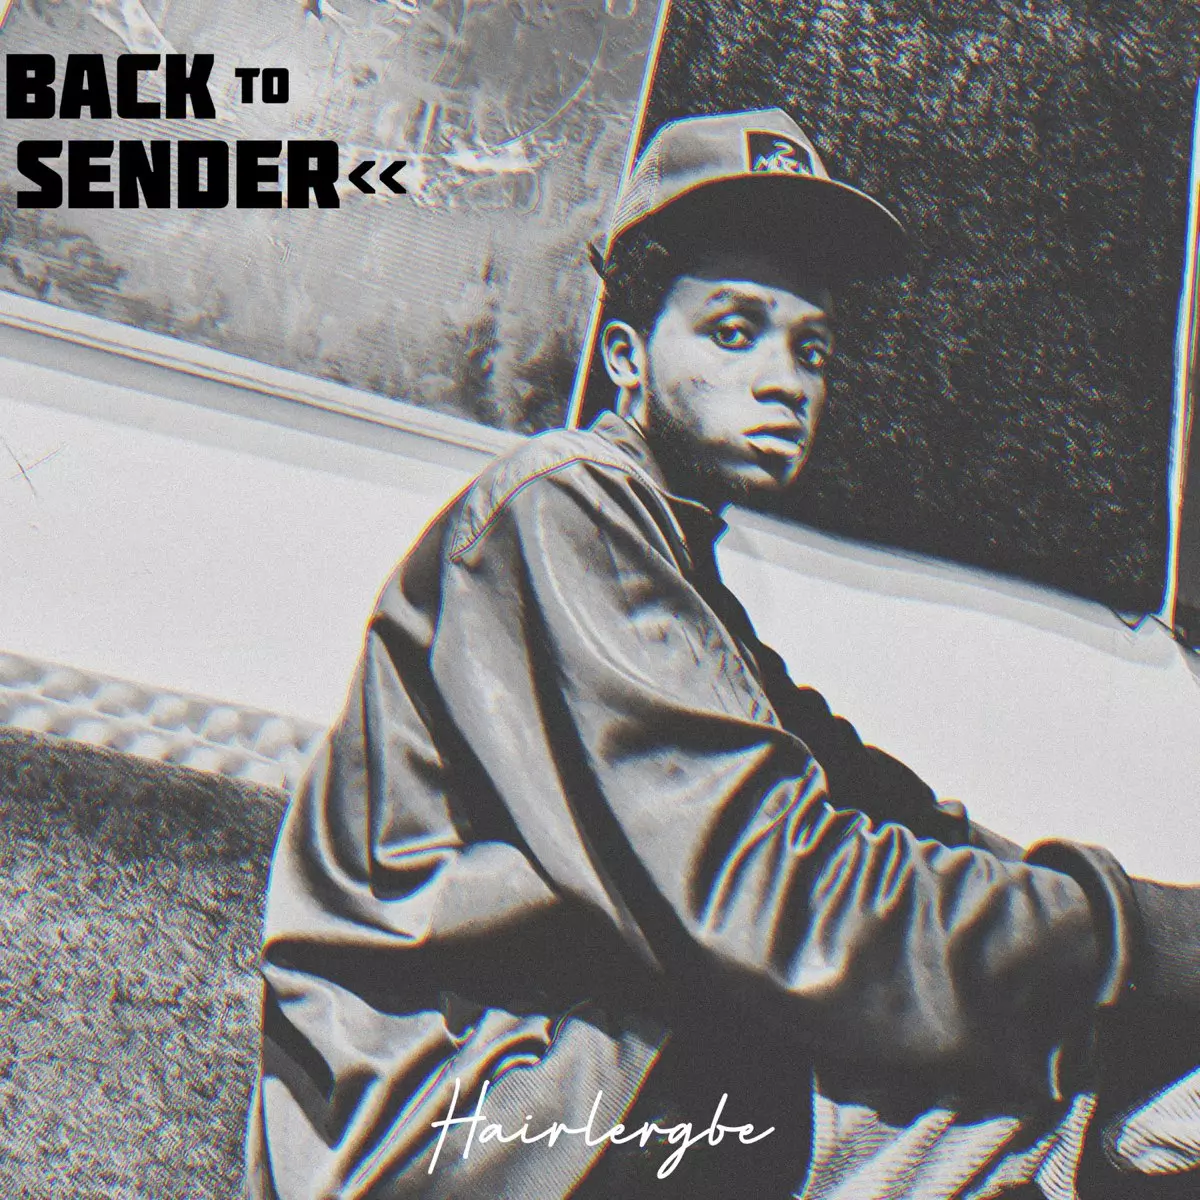 Back To Sender - Single by Hairlergbe on Apple Music